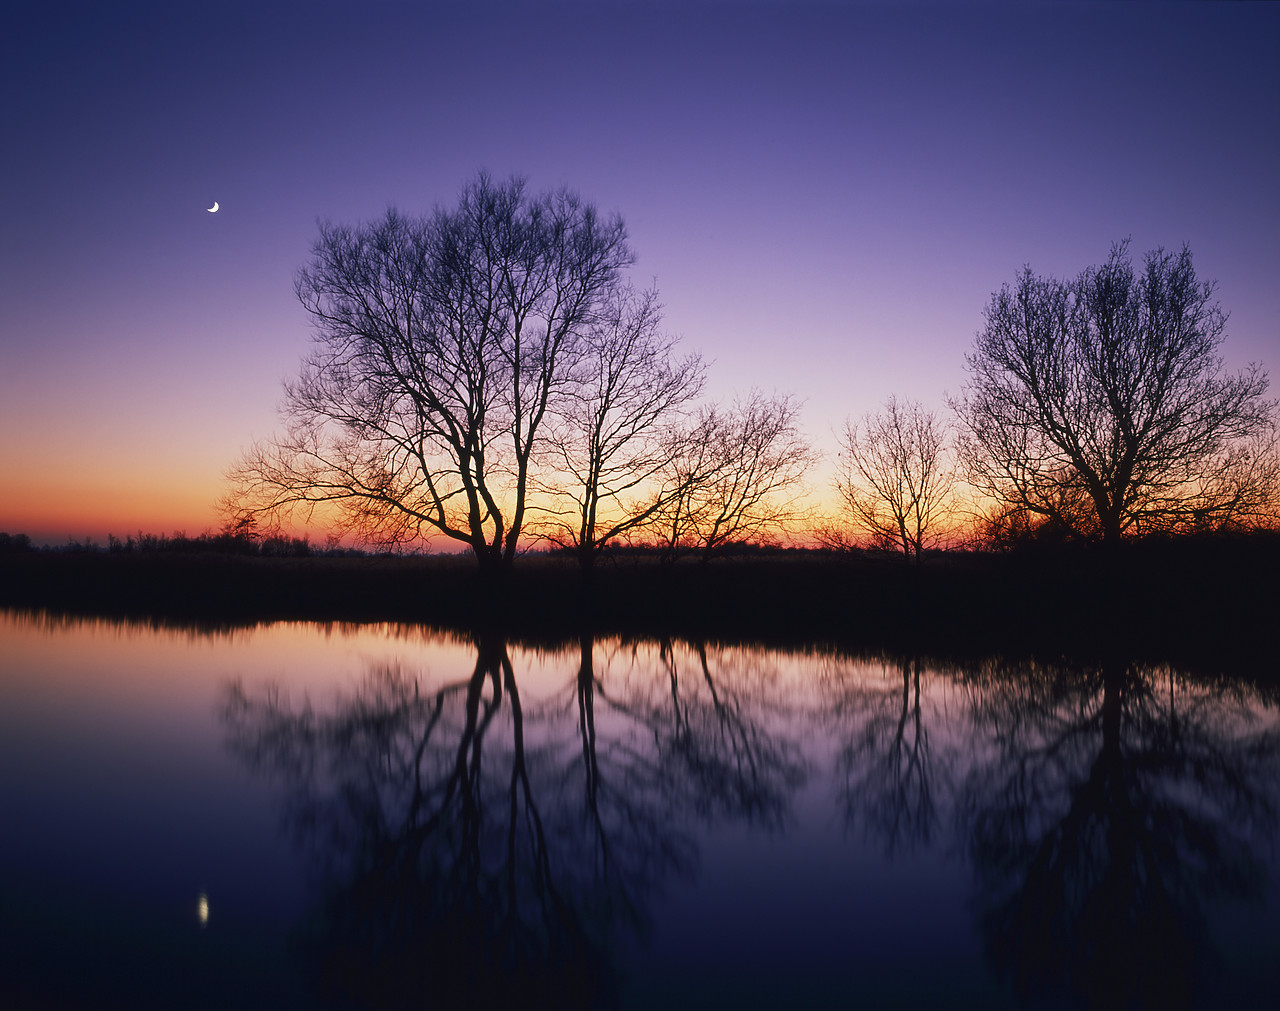 #891829 - Moon & Tree Reflections, River Ant, Norfolk, England